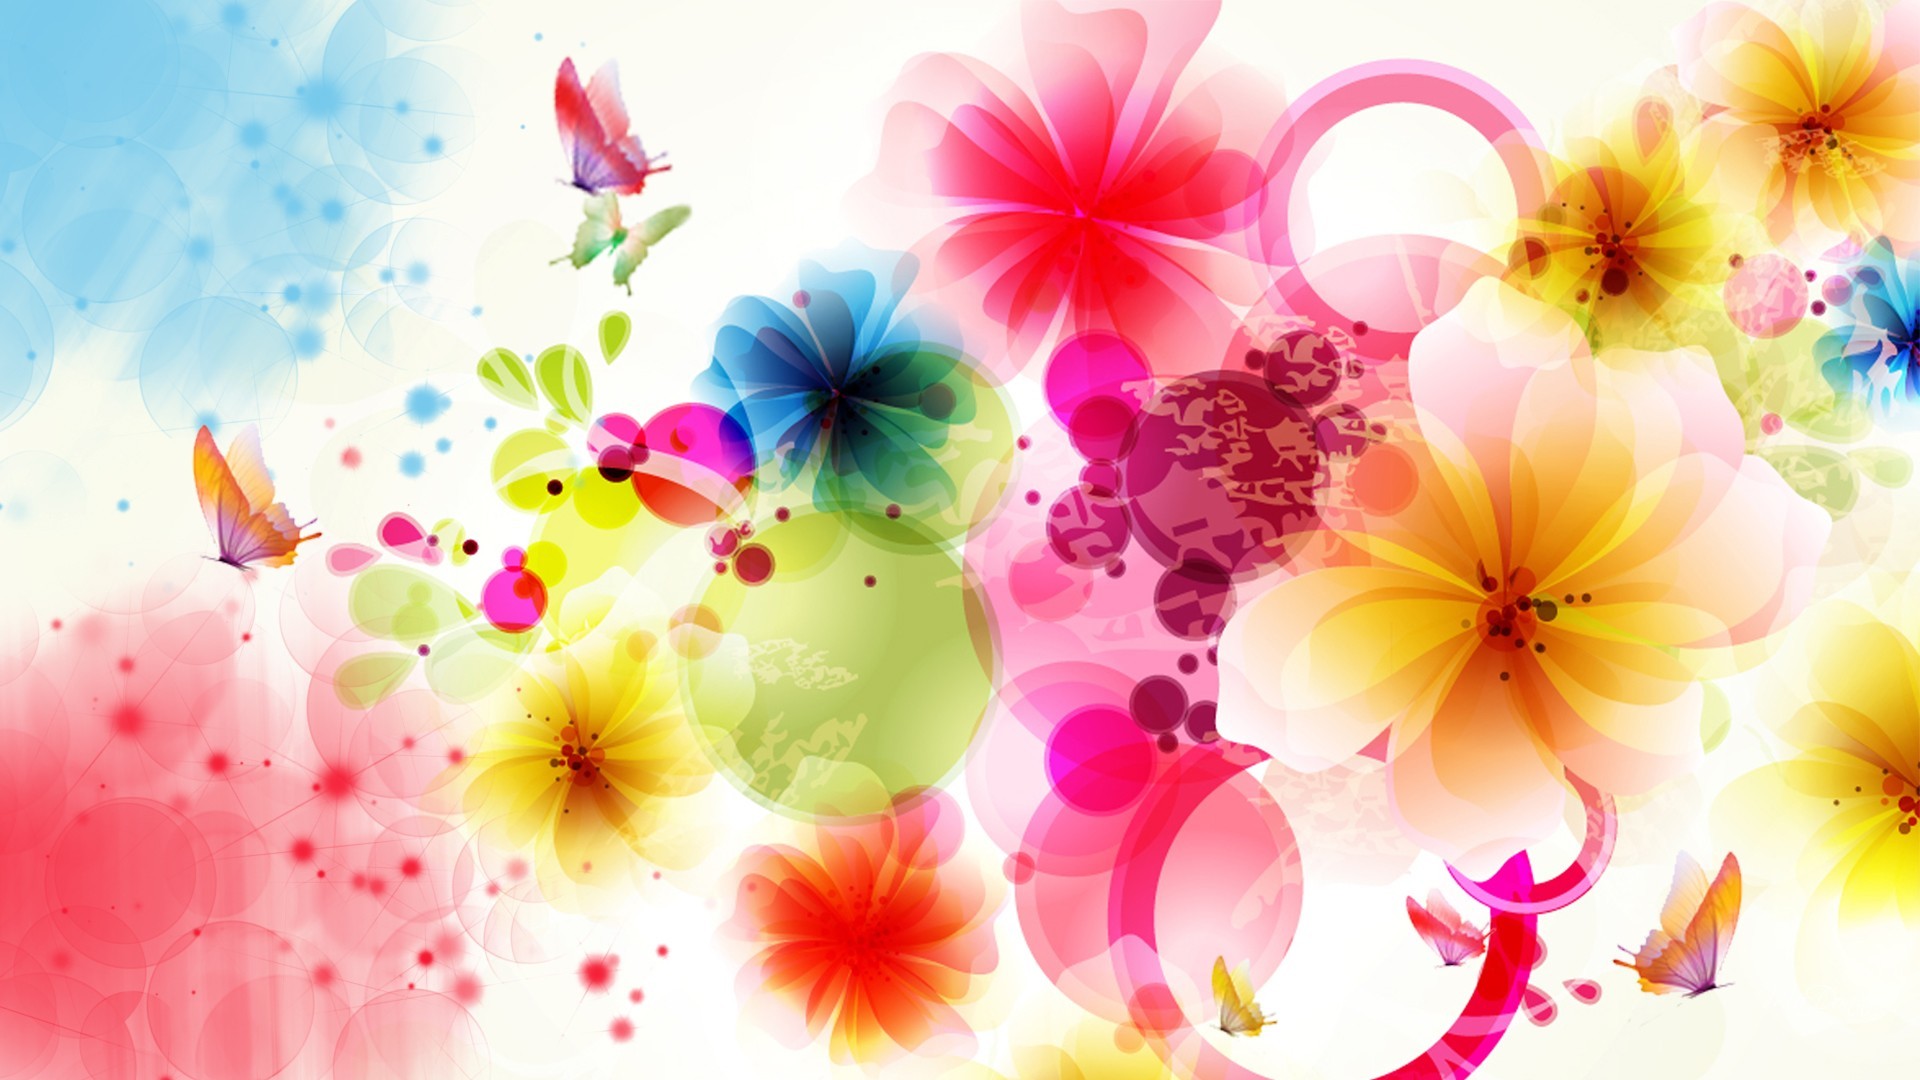 1920x1080 Abstract Flower Wallpaper High Definition High Quality Widescreen amazing  Wallpapers